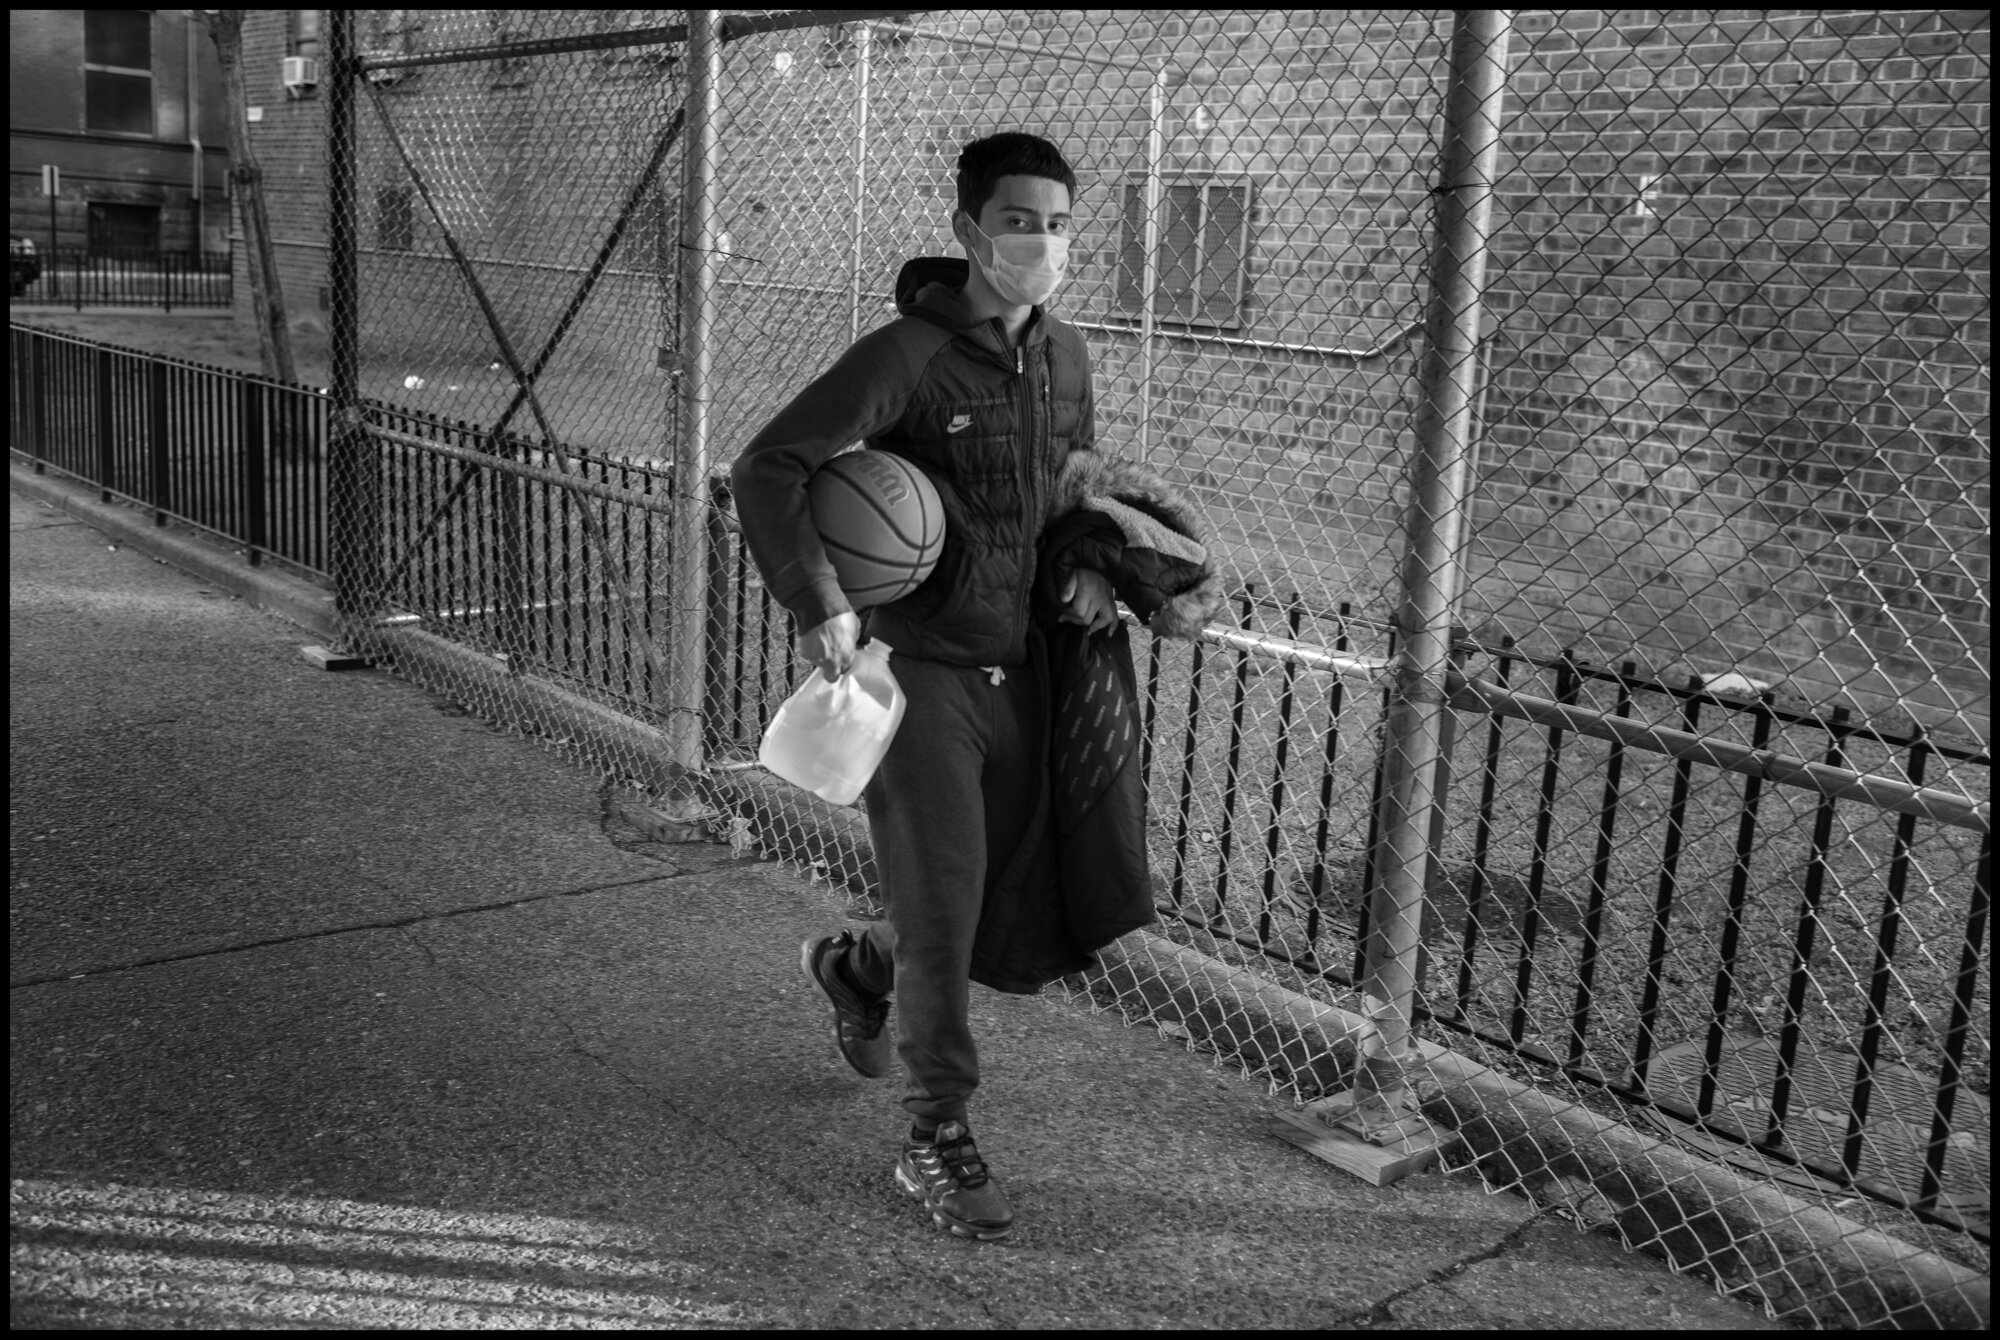  Rummy, returns alone from shooting baskets, wearing his protective mask, on Amsterdam Ave. on the Upper Westside.  March 24, 2020. © Peter Turnley.  ID# 03-011 